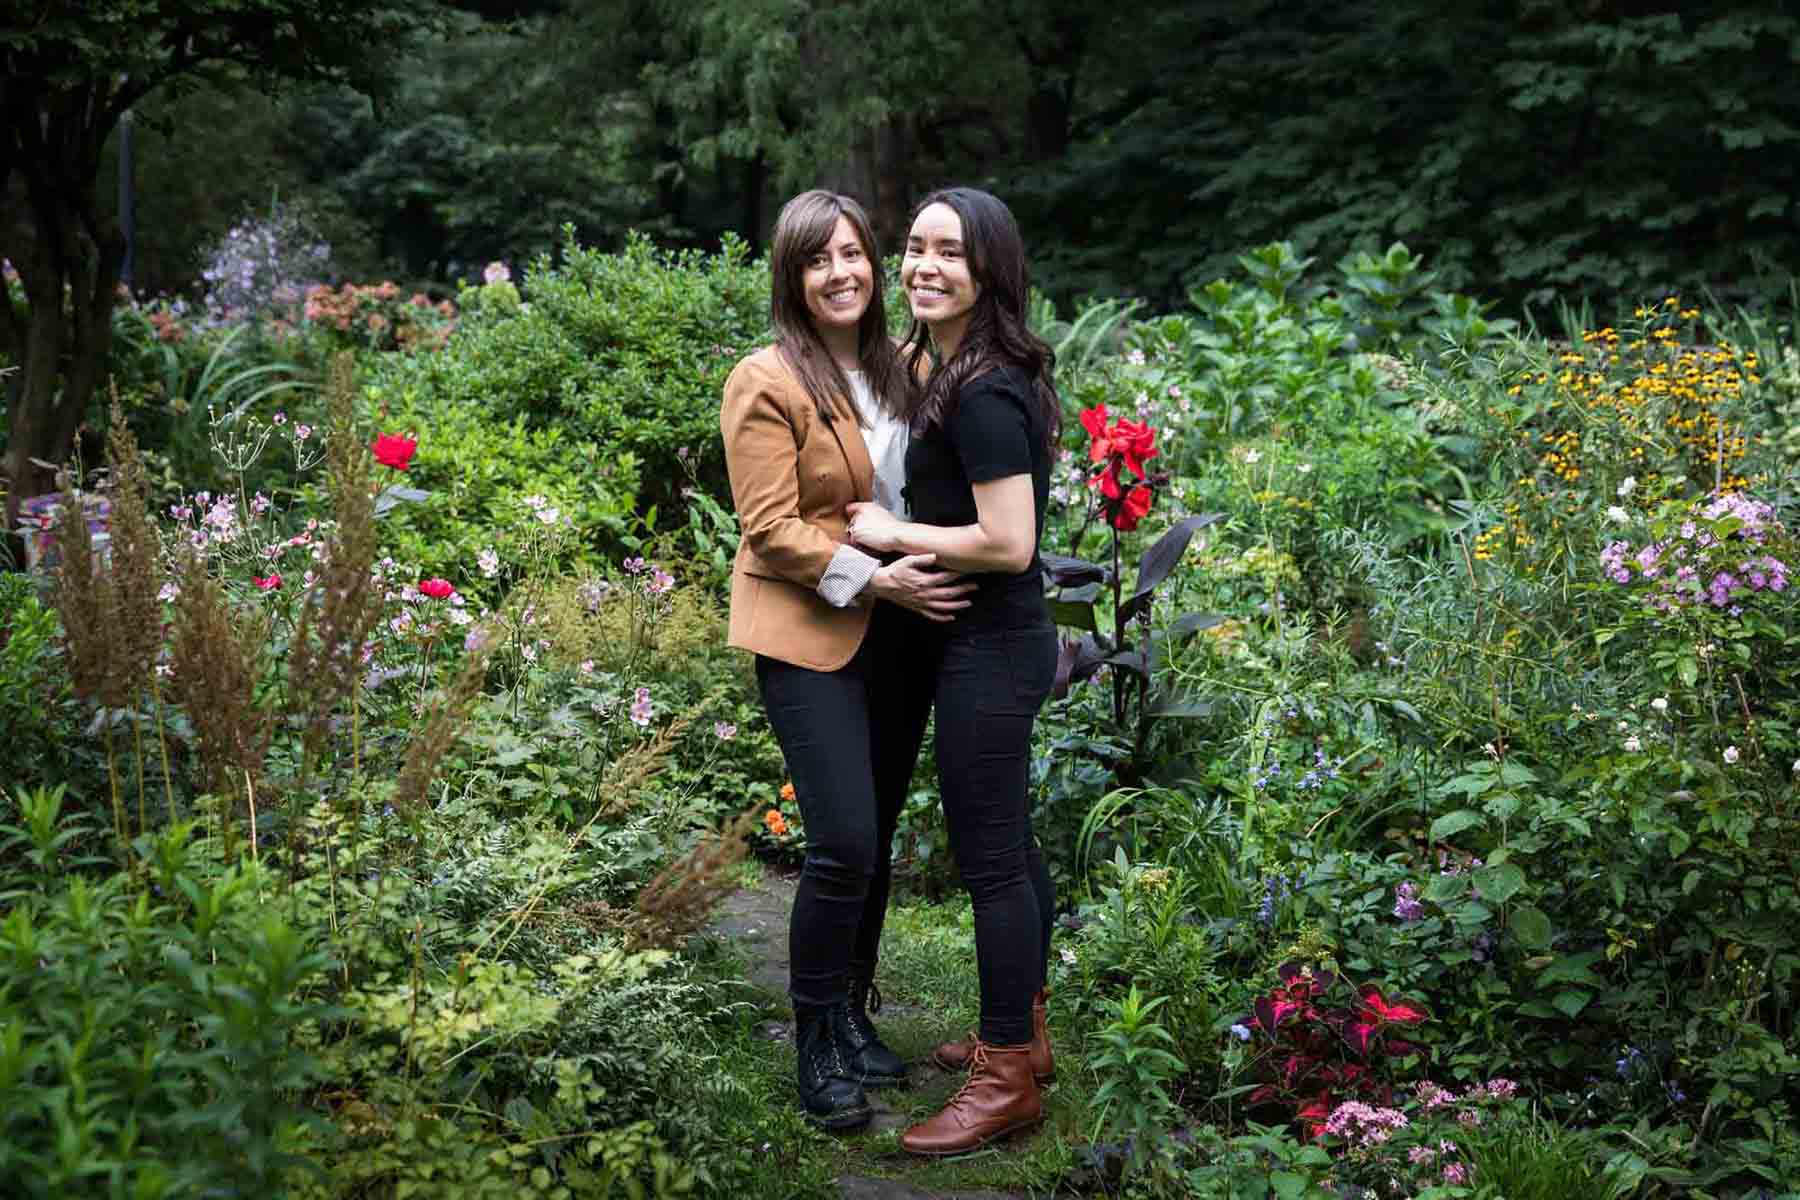 Two women standing in Riverside Park surrounded by green foliage and flowers for an article on how to produce a movie-themed surprise proposal